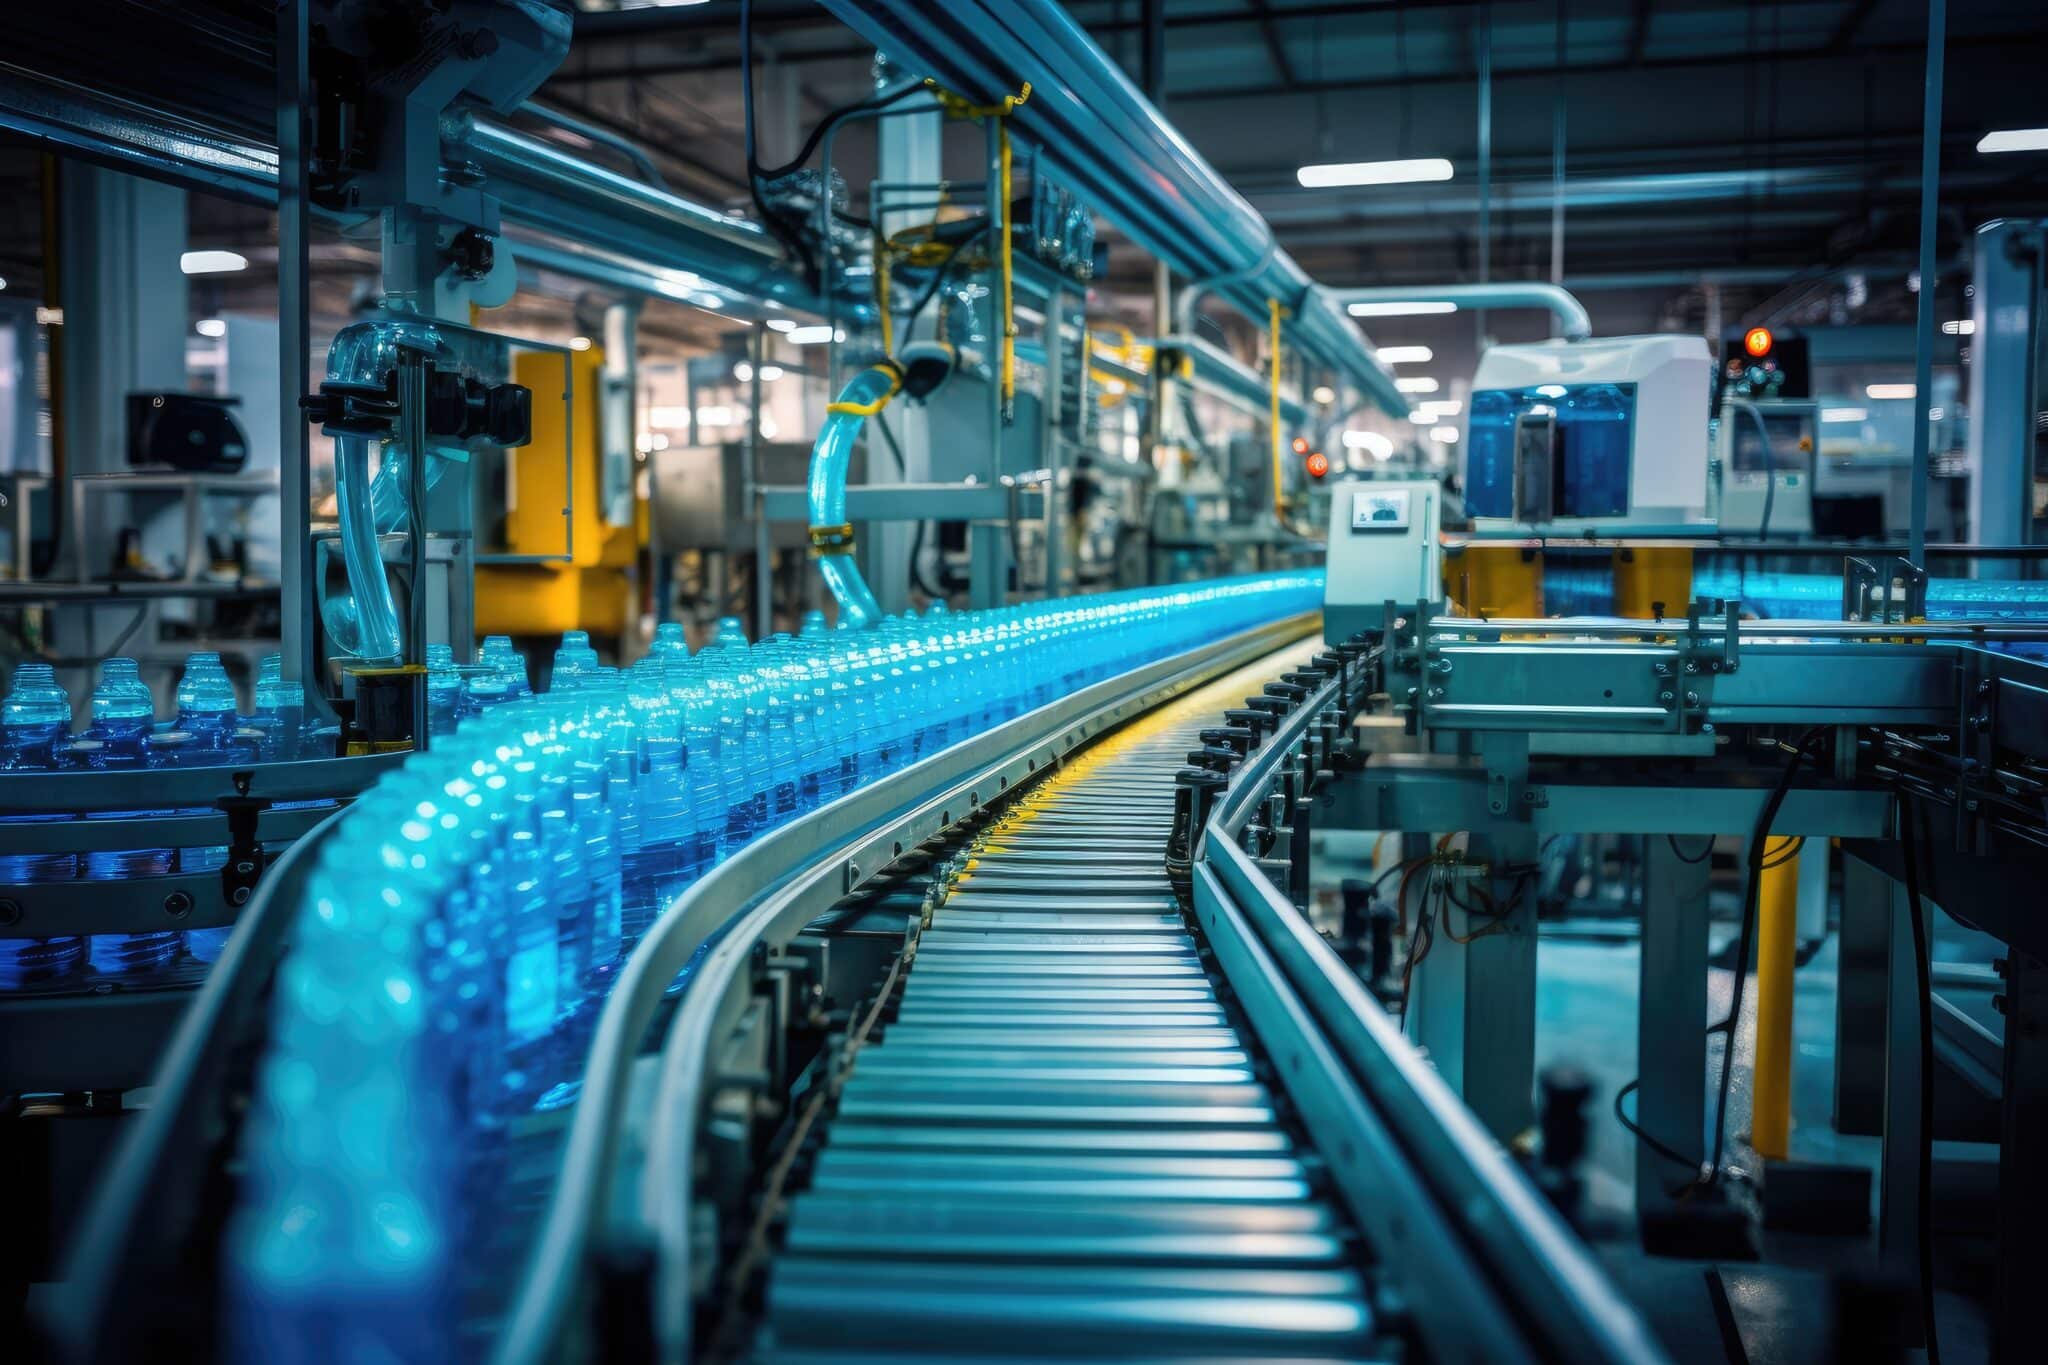 production line at beverage manufacturing company, bottles on a conveyor belt at a factory